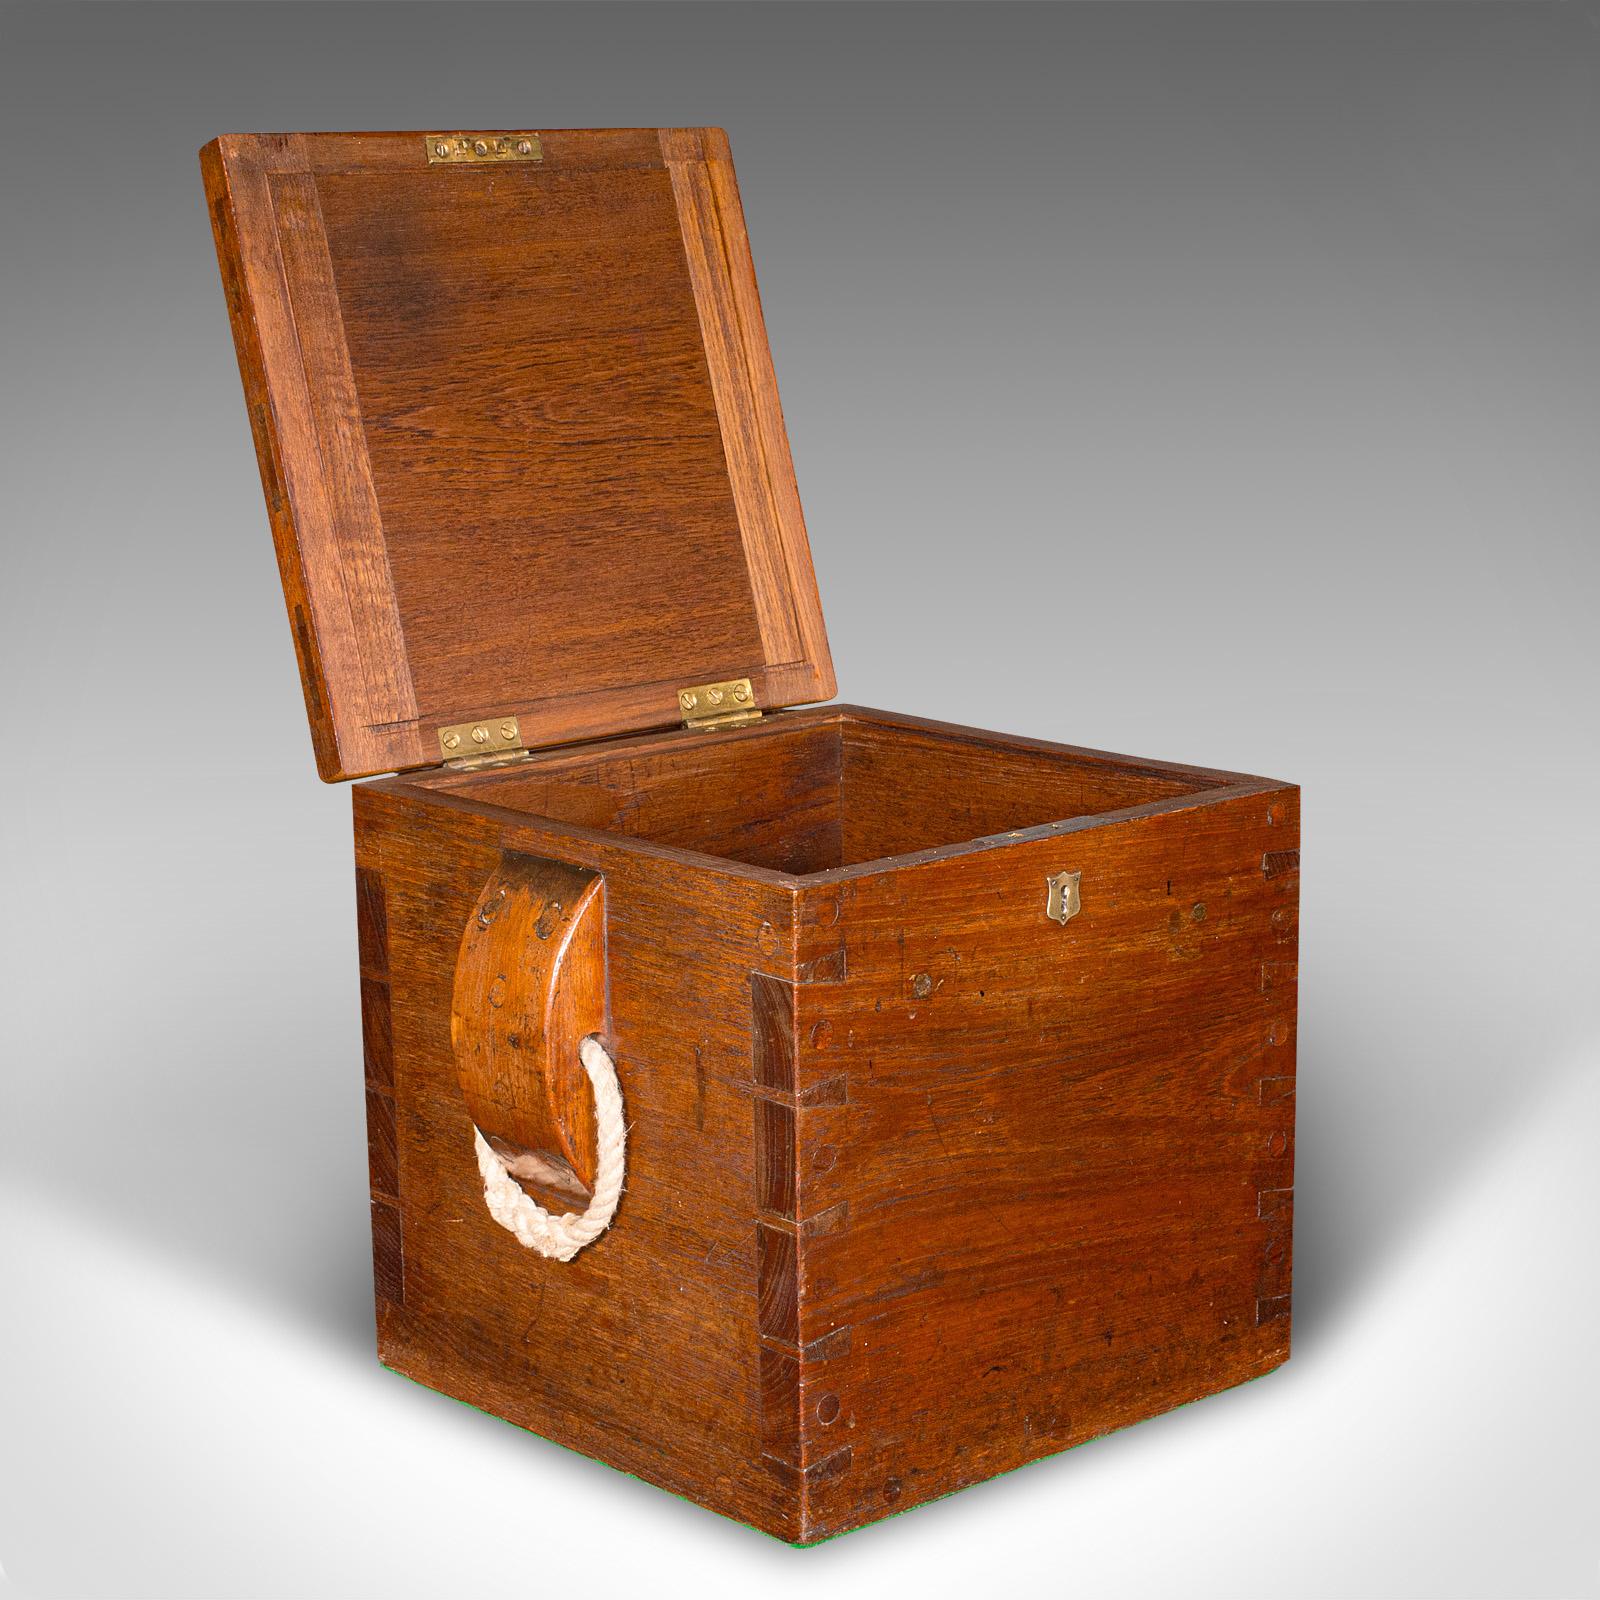 This is an antique storage box. An English, solid walnut fireside bin or occasional seat, dating to the late Victorian period, circa 1880.

Fascinating and substantial, with an appealing military link
Displays a desirable aged patina and in good